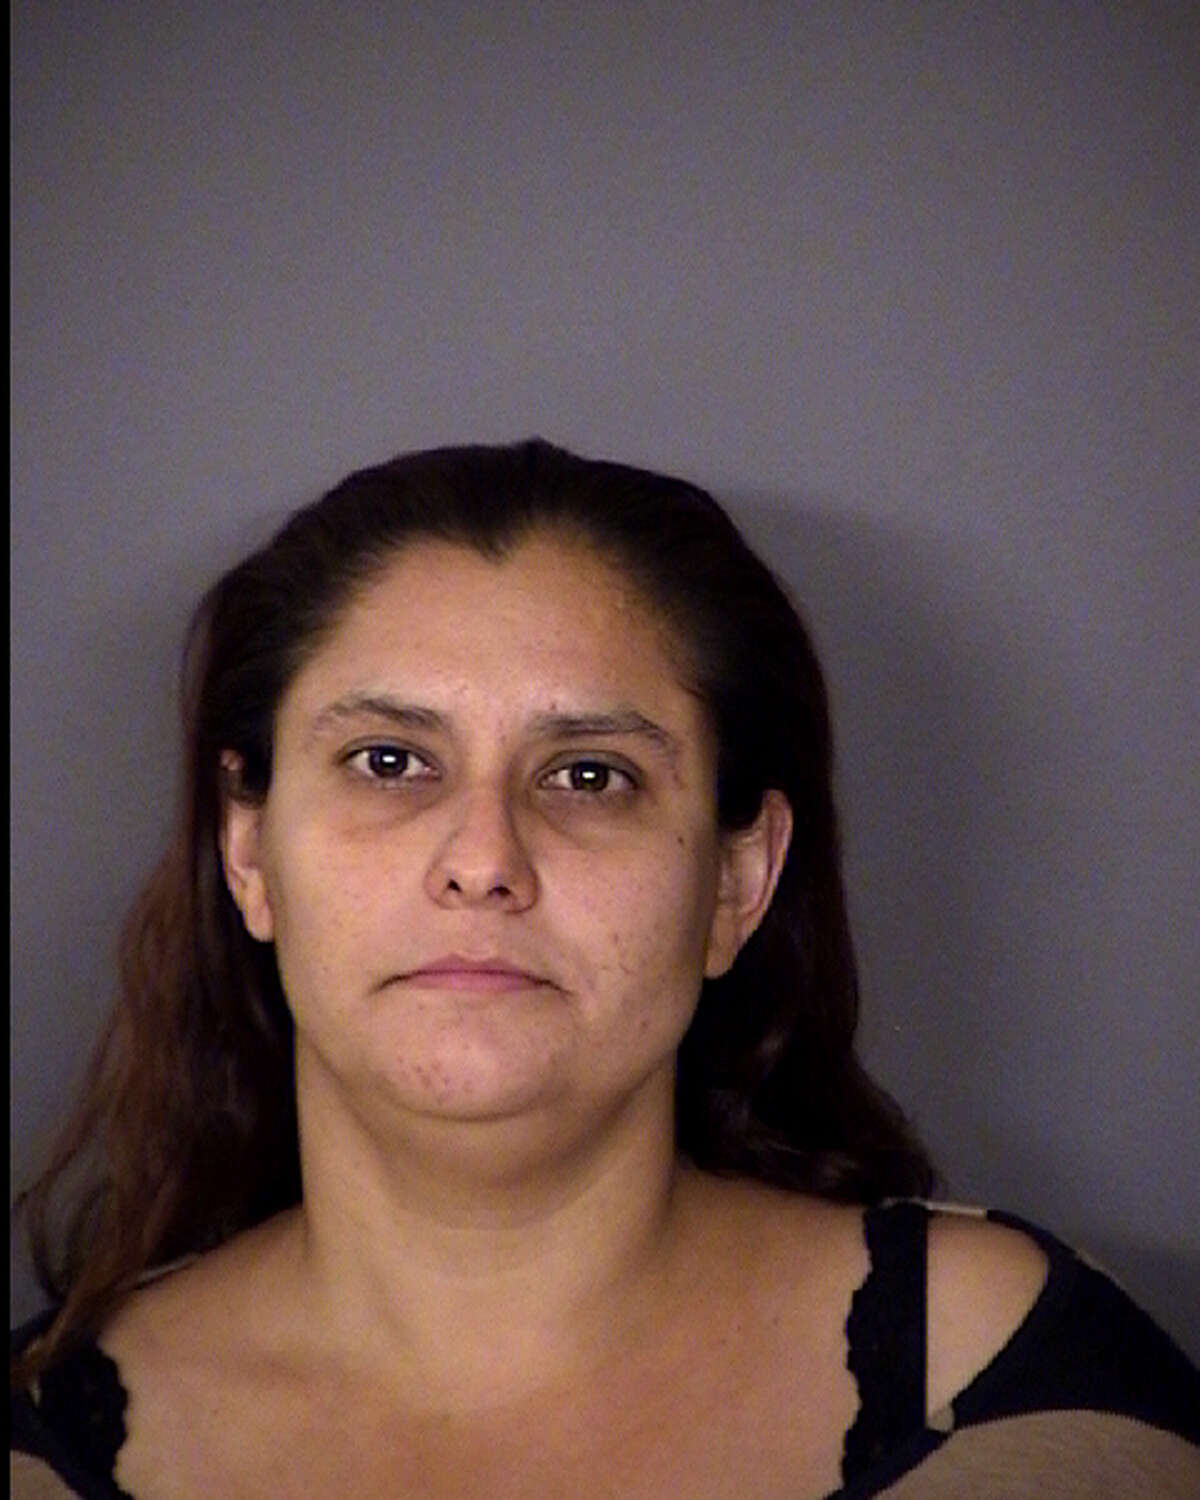 The Texas Department of Public Safety arrested and charged Marcelina Adame, 35, with compelling prostitution of a minor on Friday.